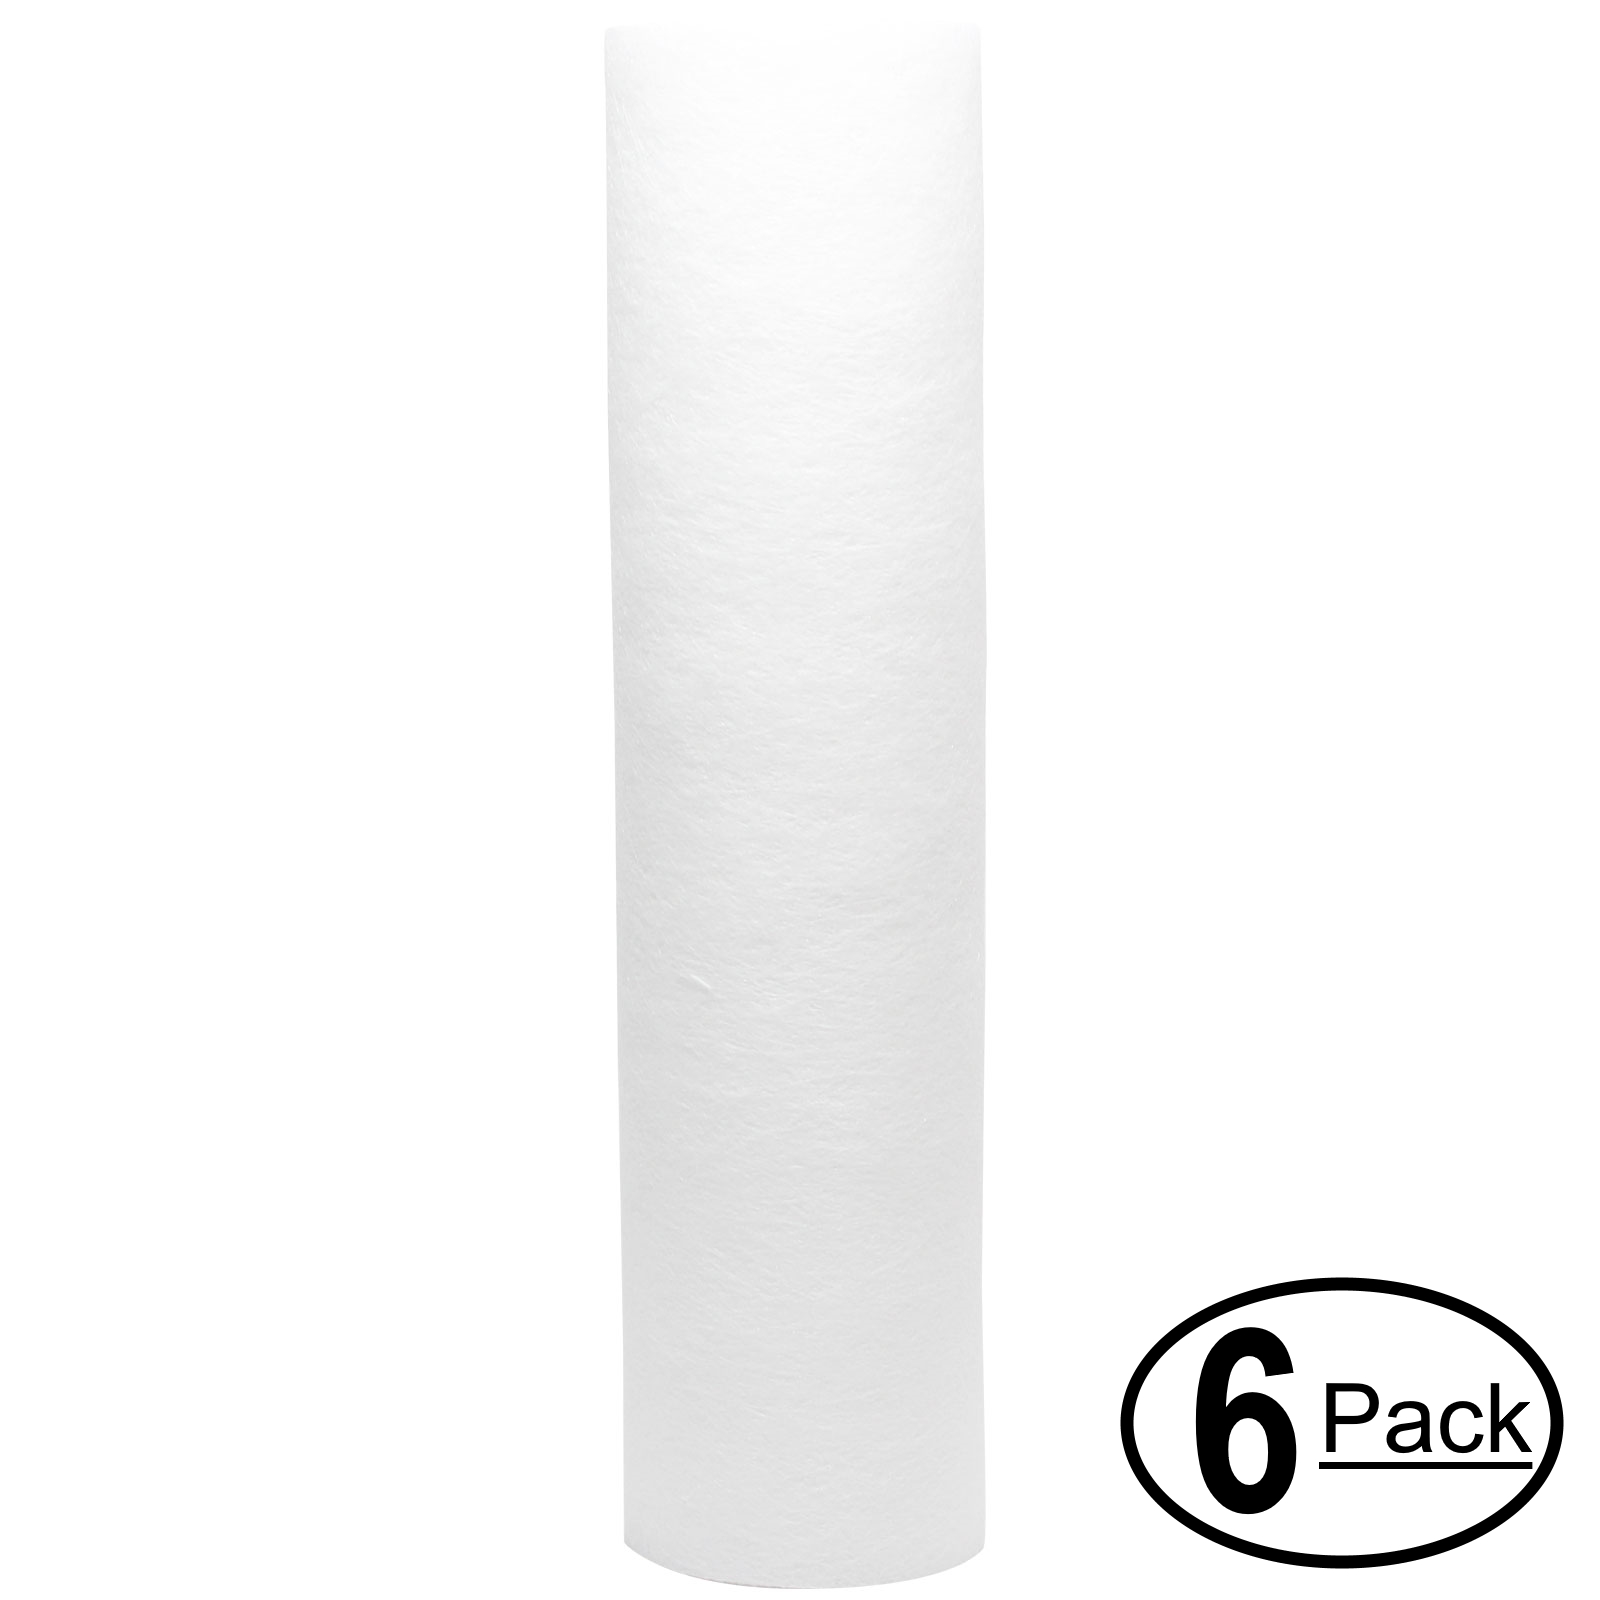 6-Pack Replacement for GE GX1S01R Polypropylene Sediment Filter - Universal 10-inch 5-Micron Cartridge for GE SINGLE STAGE DRINKING WATER FILTRATION UNIT - Denali Pure Brand - image 1 of 4